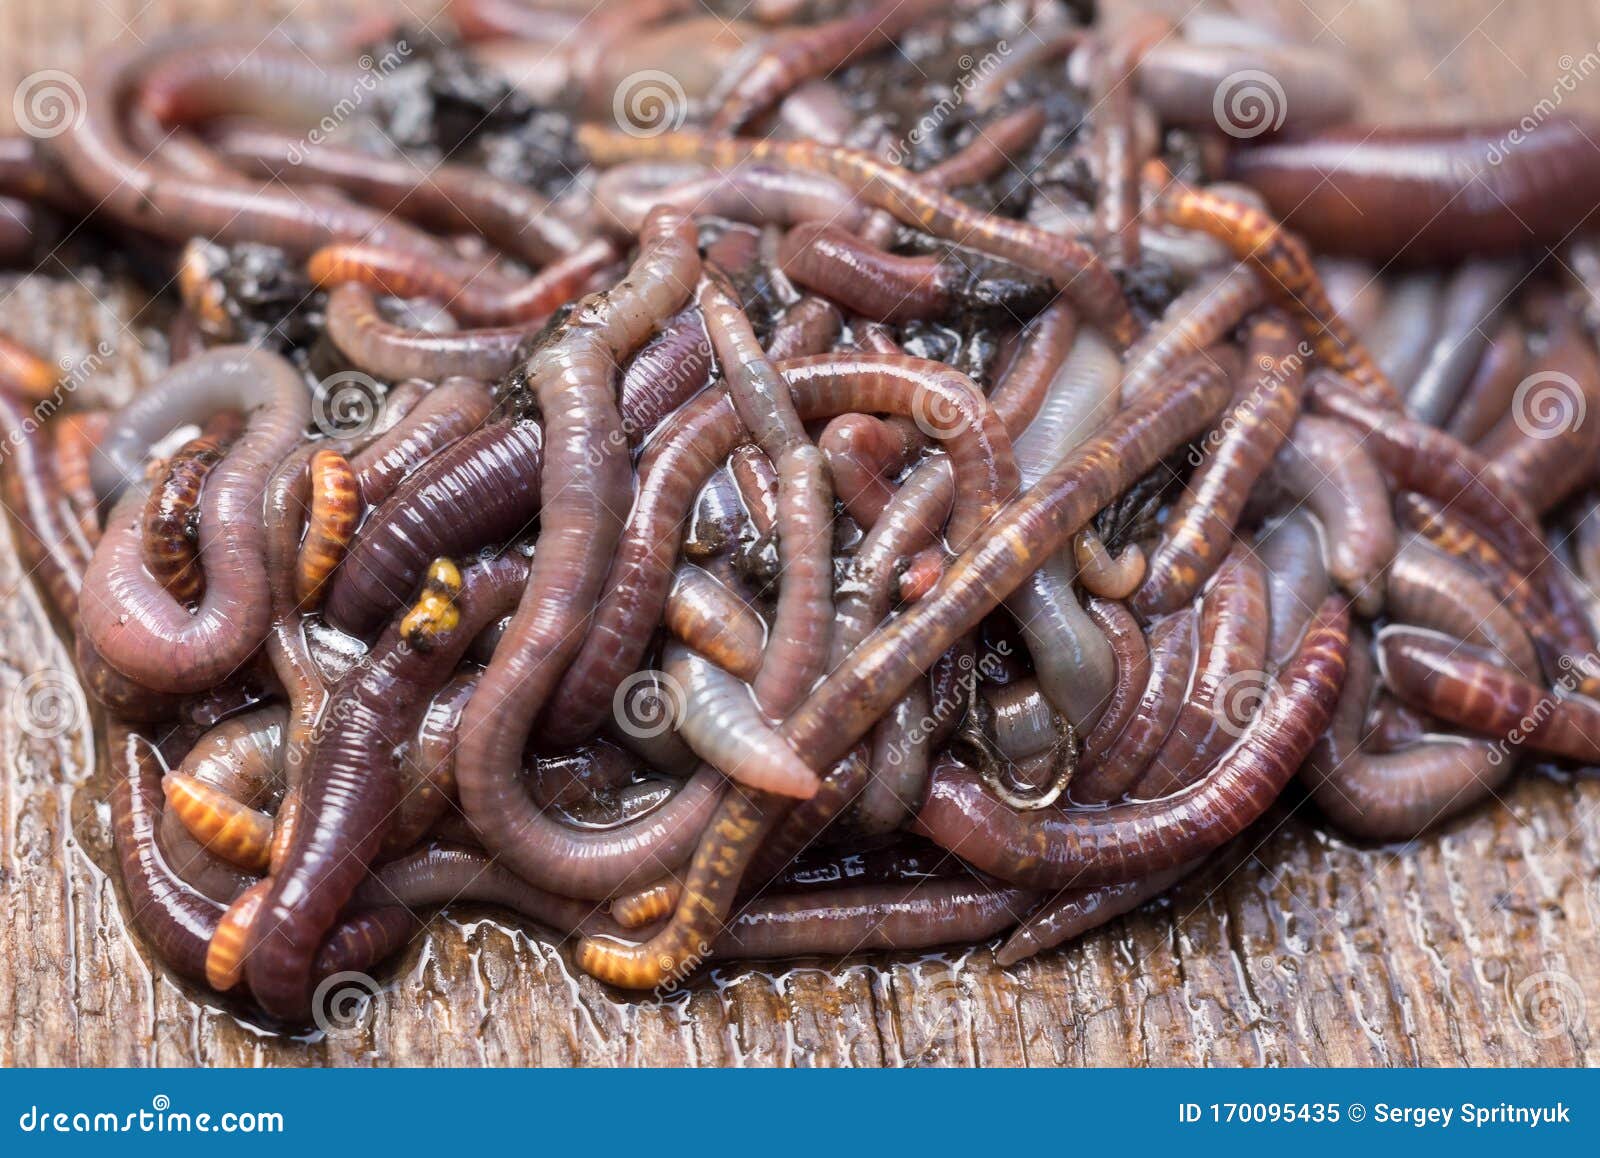 Rainwater and Manure Worms on the Wooden Surface, Bait for Fishing Stock  Image - Image of hunting, fish: 170095435